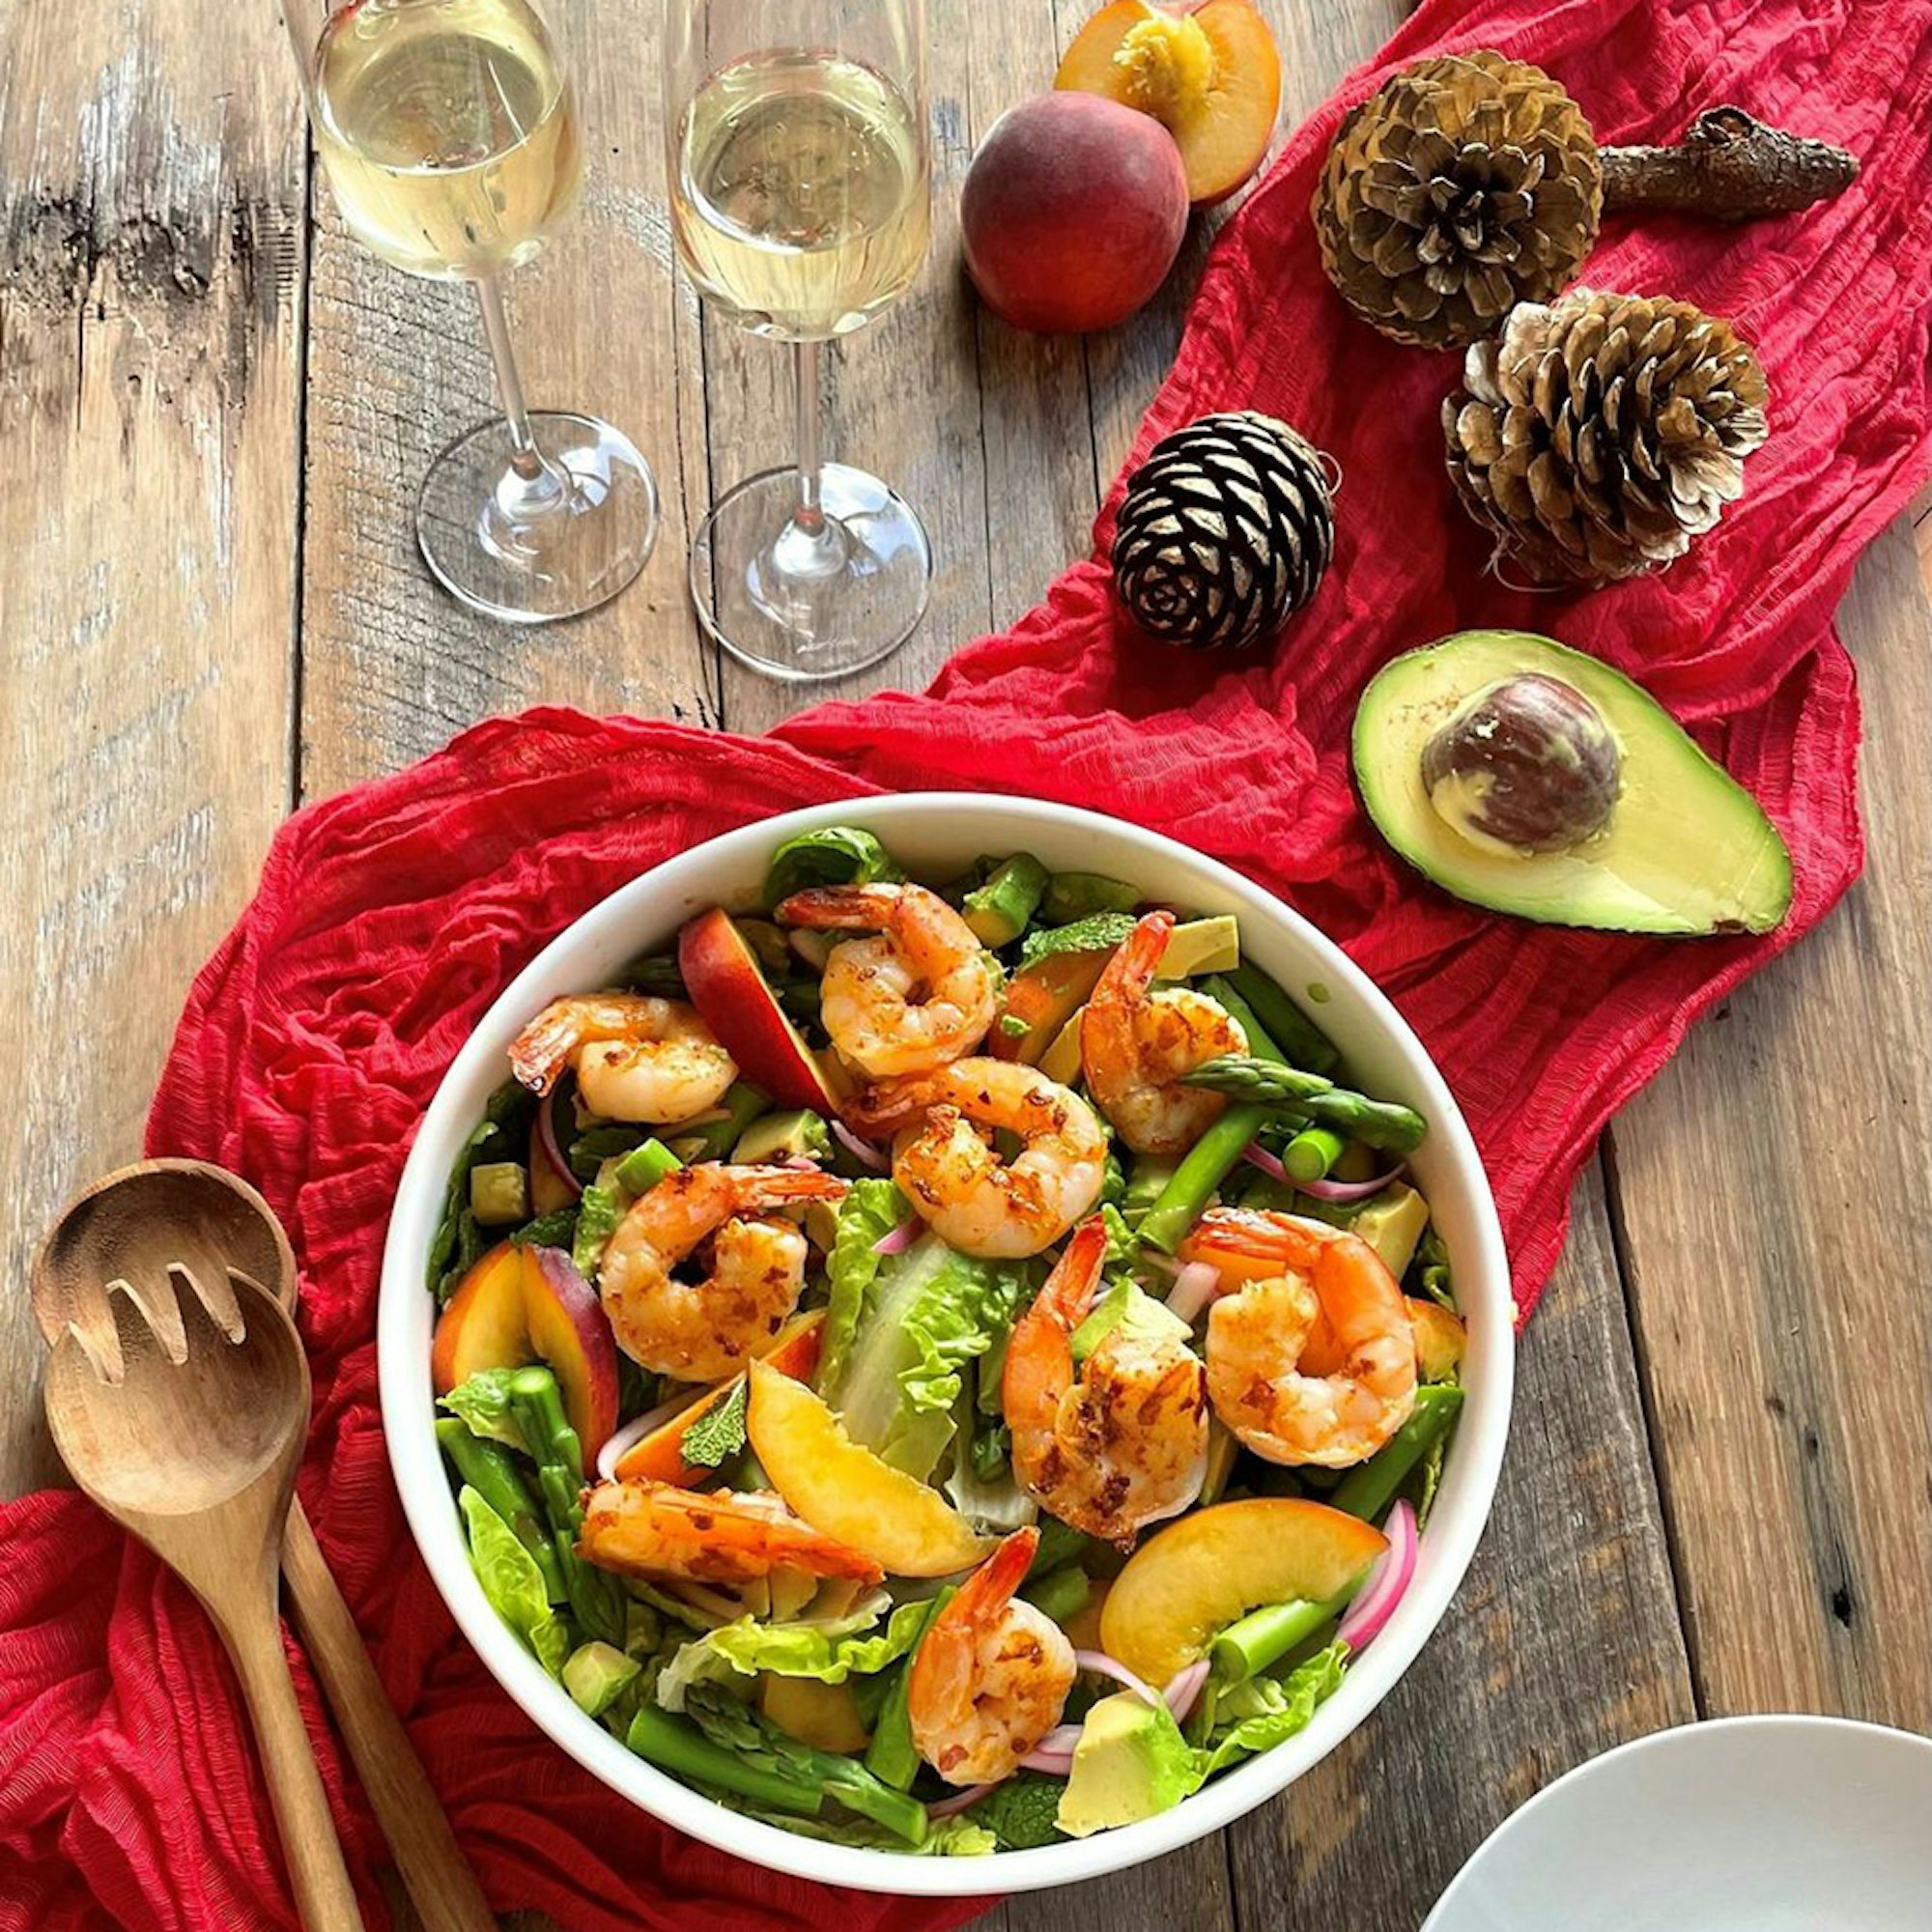 Grilled Prawn and Peach salad with a Citrus Vinaigrette Recipe